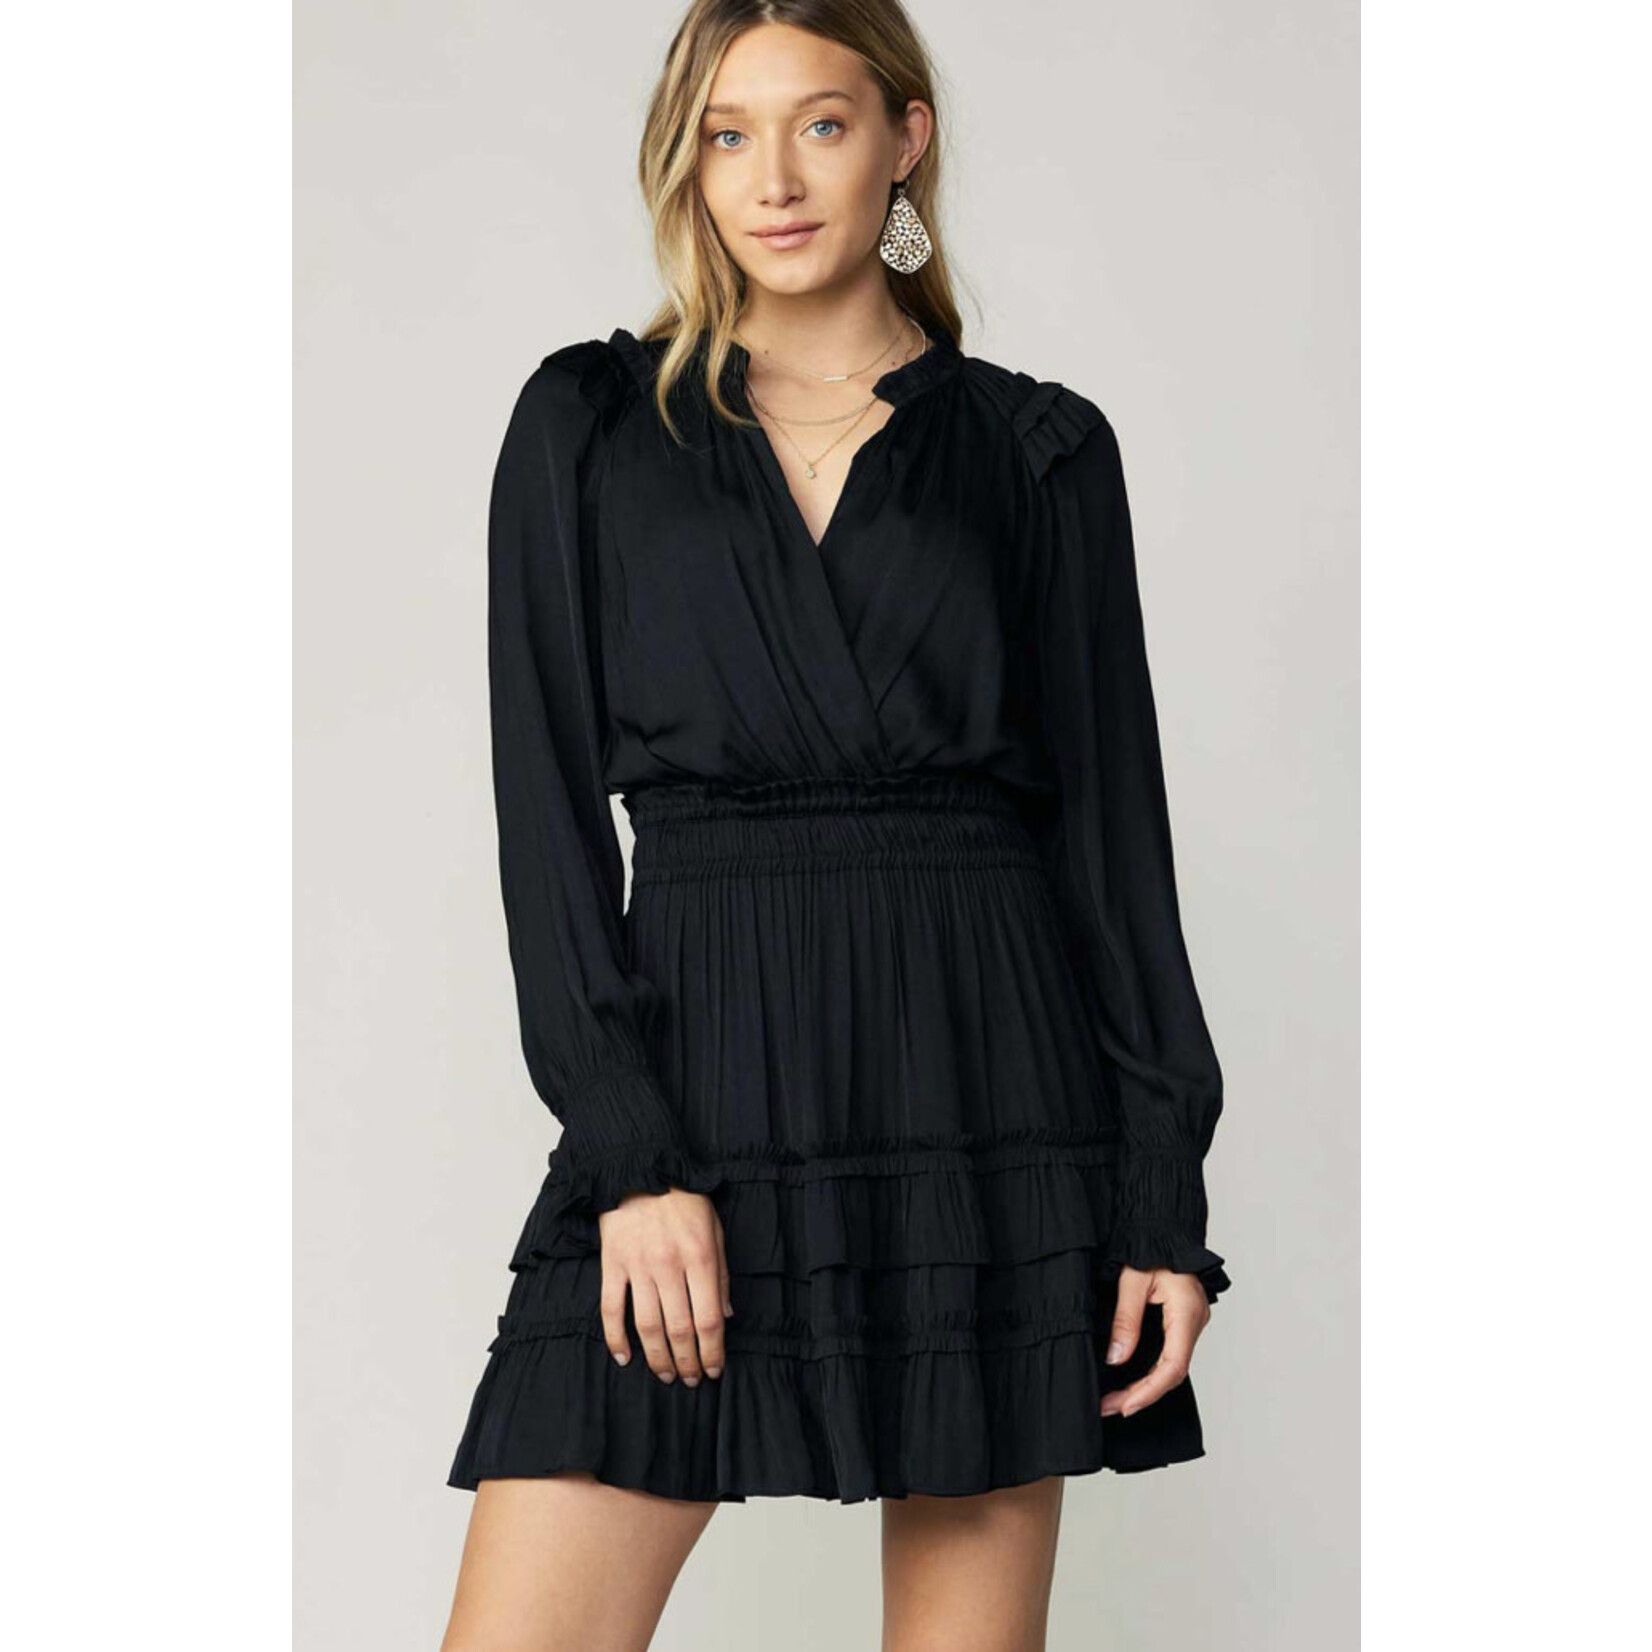 Current Air The Renee Dress